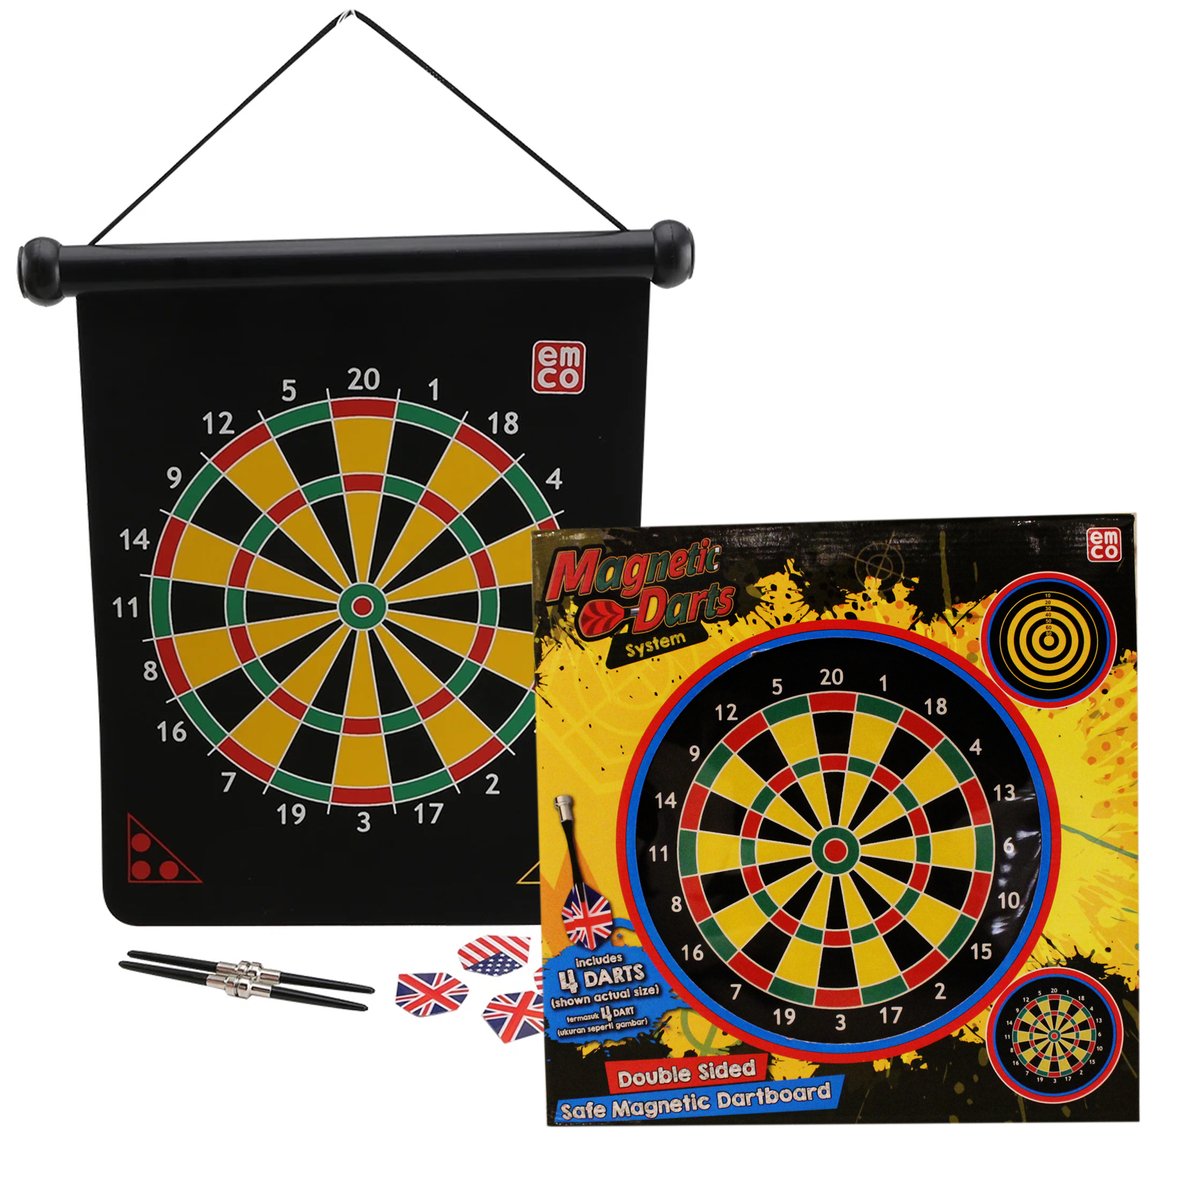 Emco Magnetic Dartboard Game S 103080